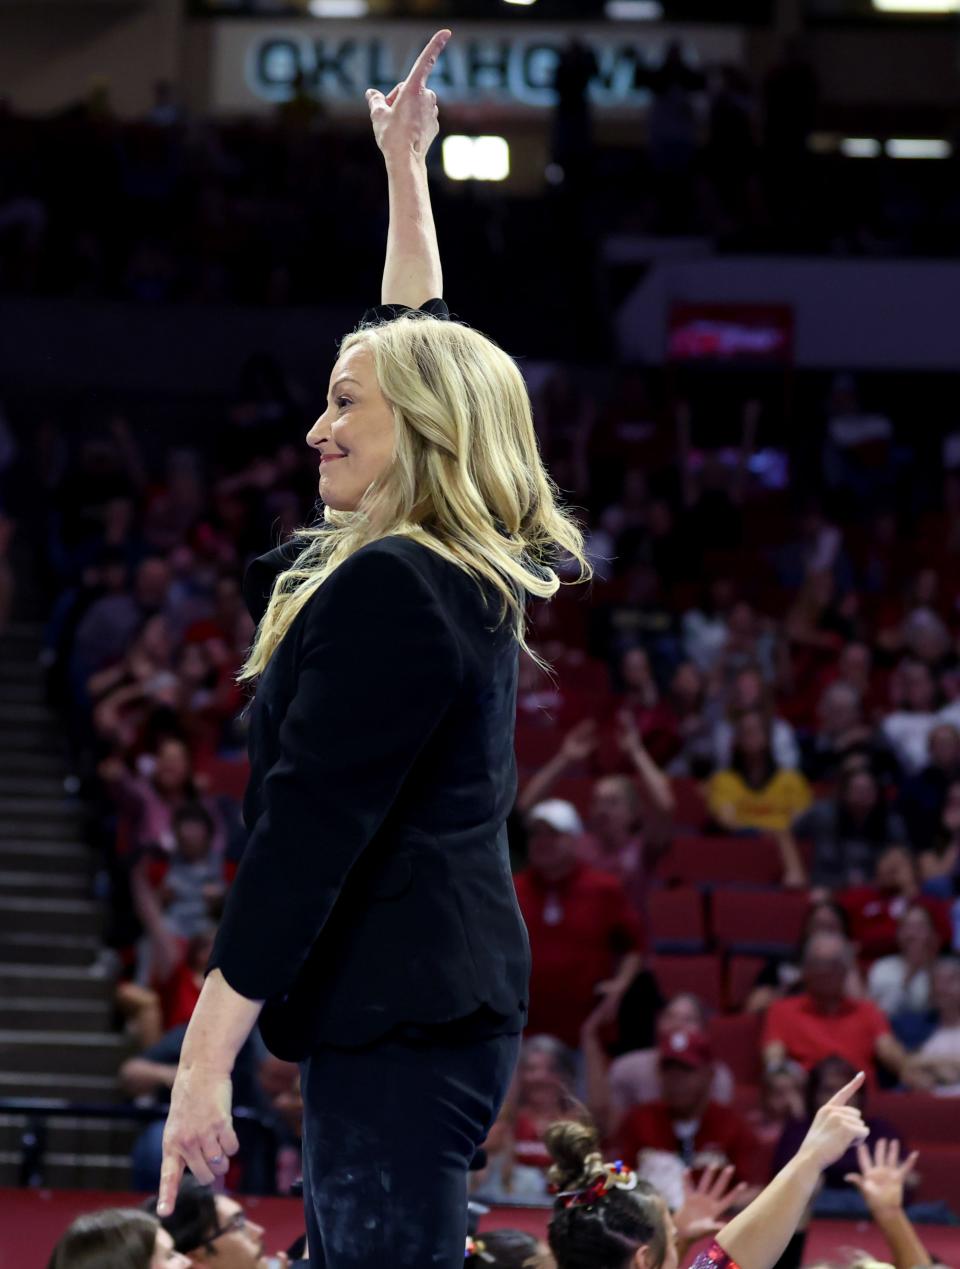 OU coach K.J. Kindler celebrates a perfect 10 by Ragan Smith on the beam during the Women's Big 12 Gymnastics Championship on Saturday at Lloyd Noble Center in Norman.